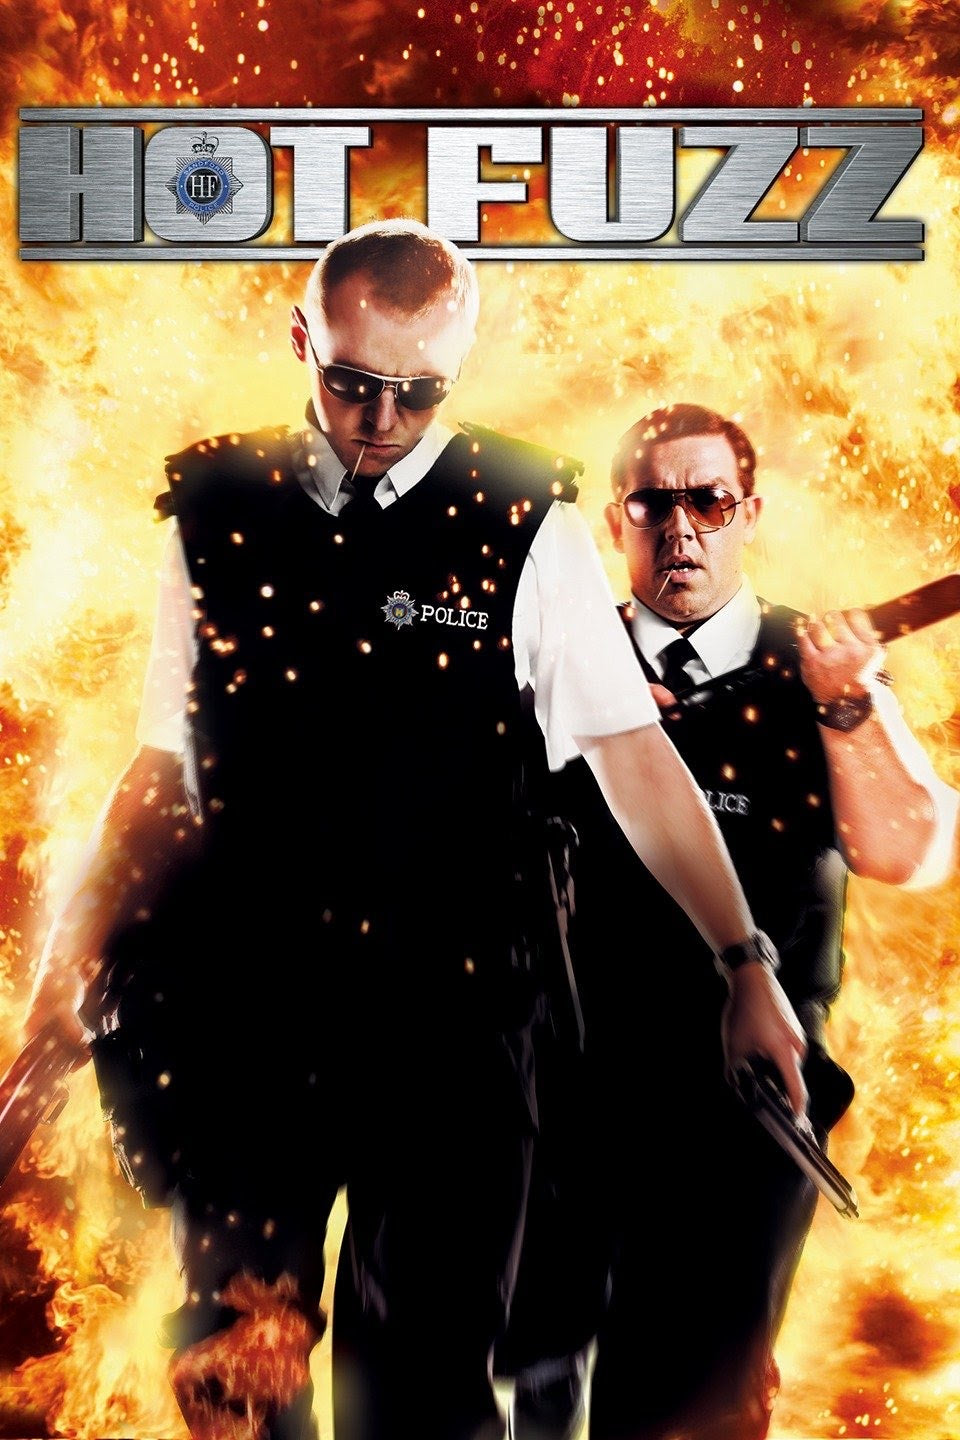 Hot Fuzz (2007) Vudu or Movies Anywhere HD redemption only